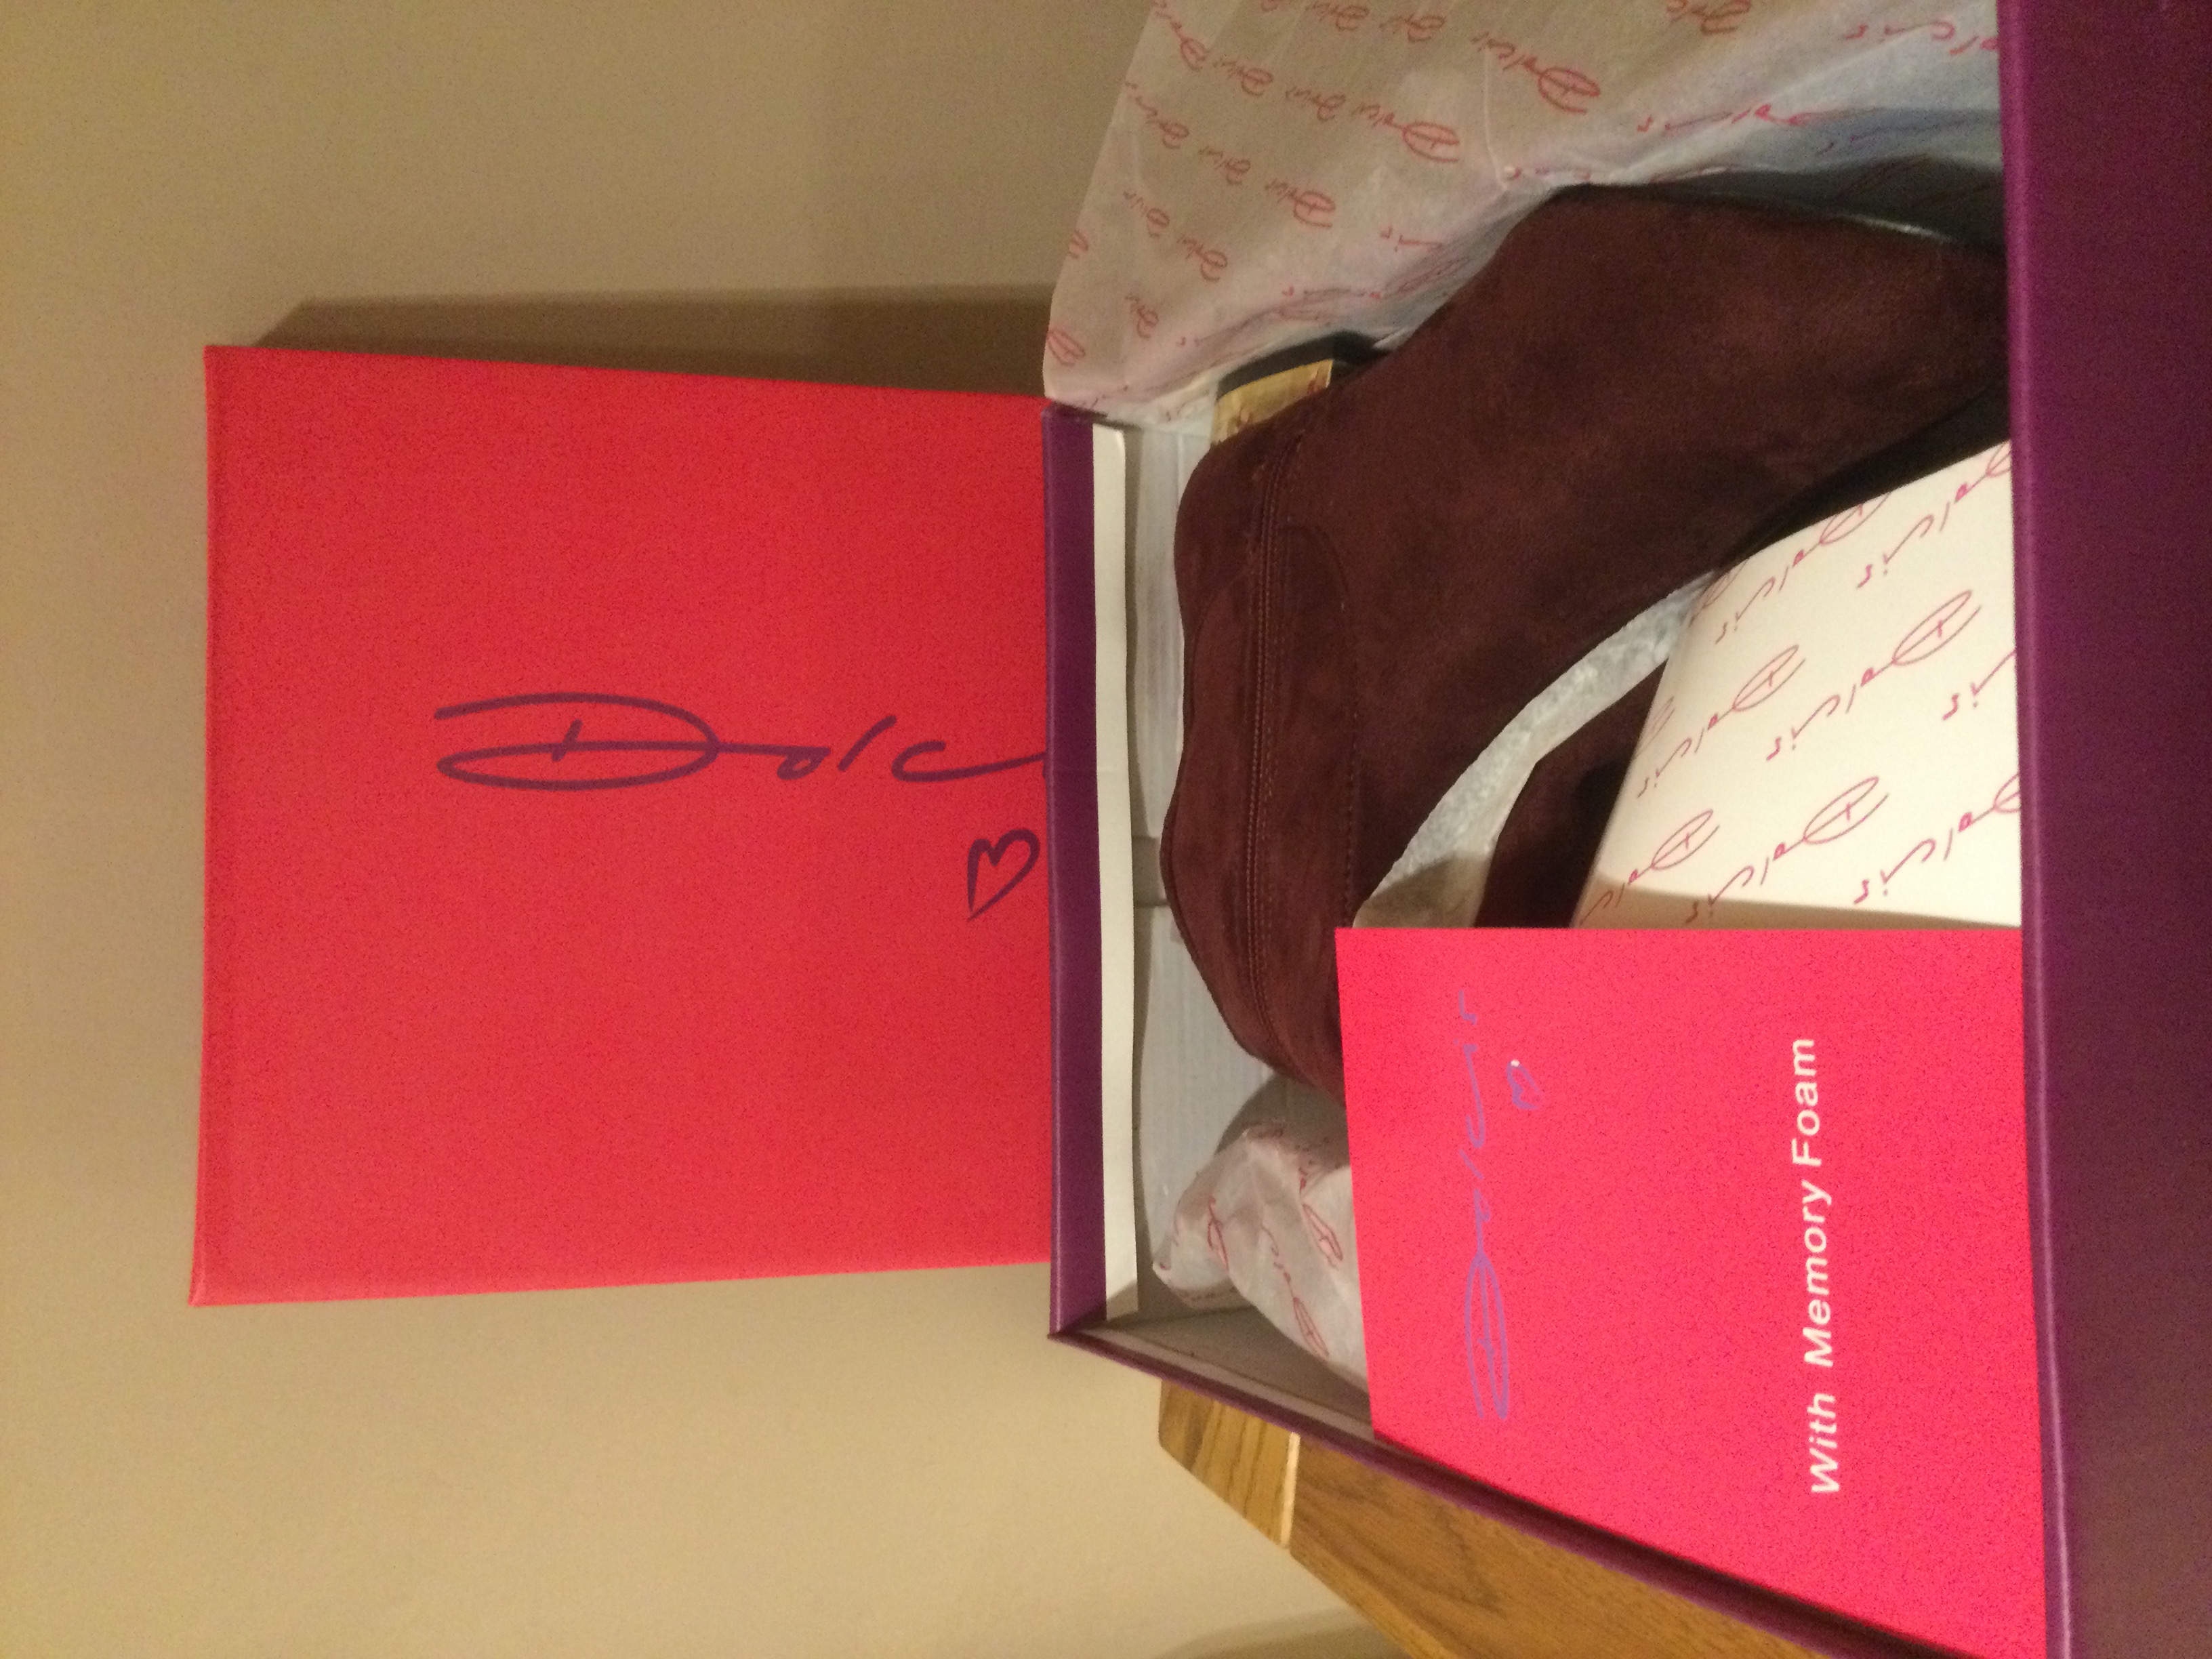 Dolcis “Katie” Long Boots, Low Heel, Size 5, Burgundy - New RRP £55.00 - Image 6 of 7